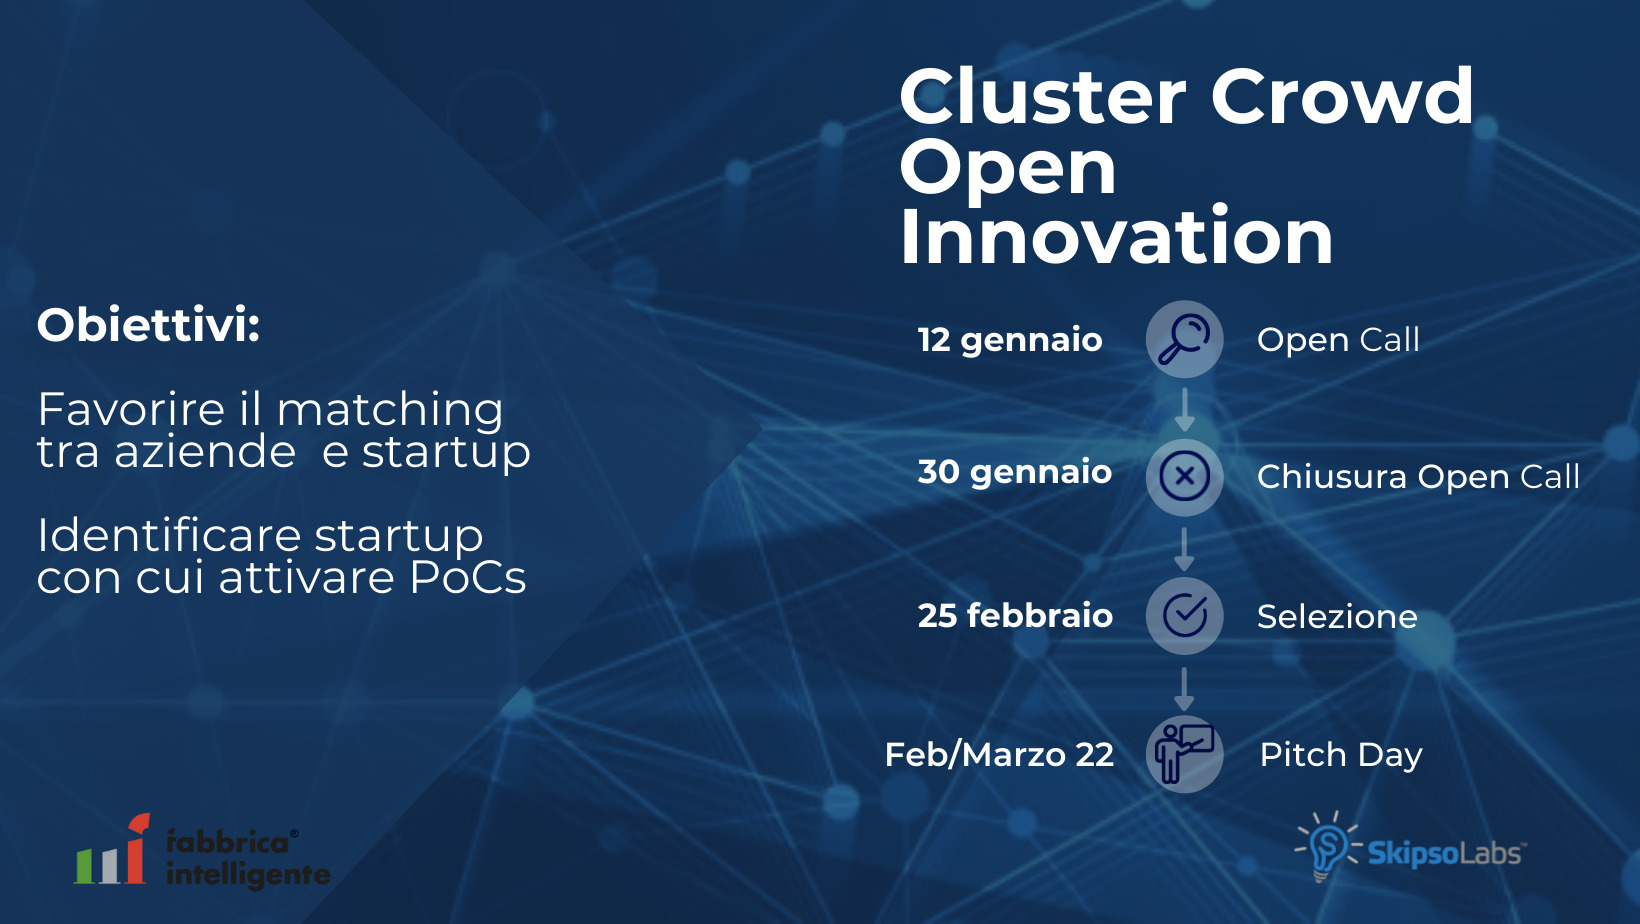 Cluster Crowd Open Innovation